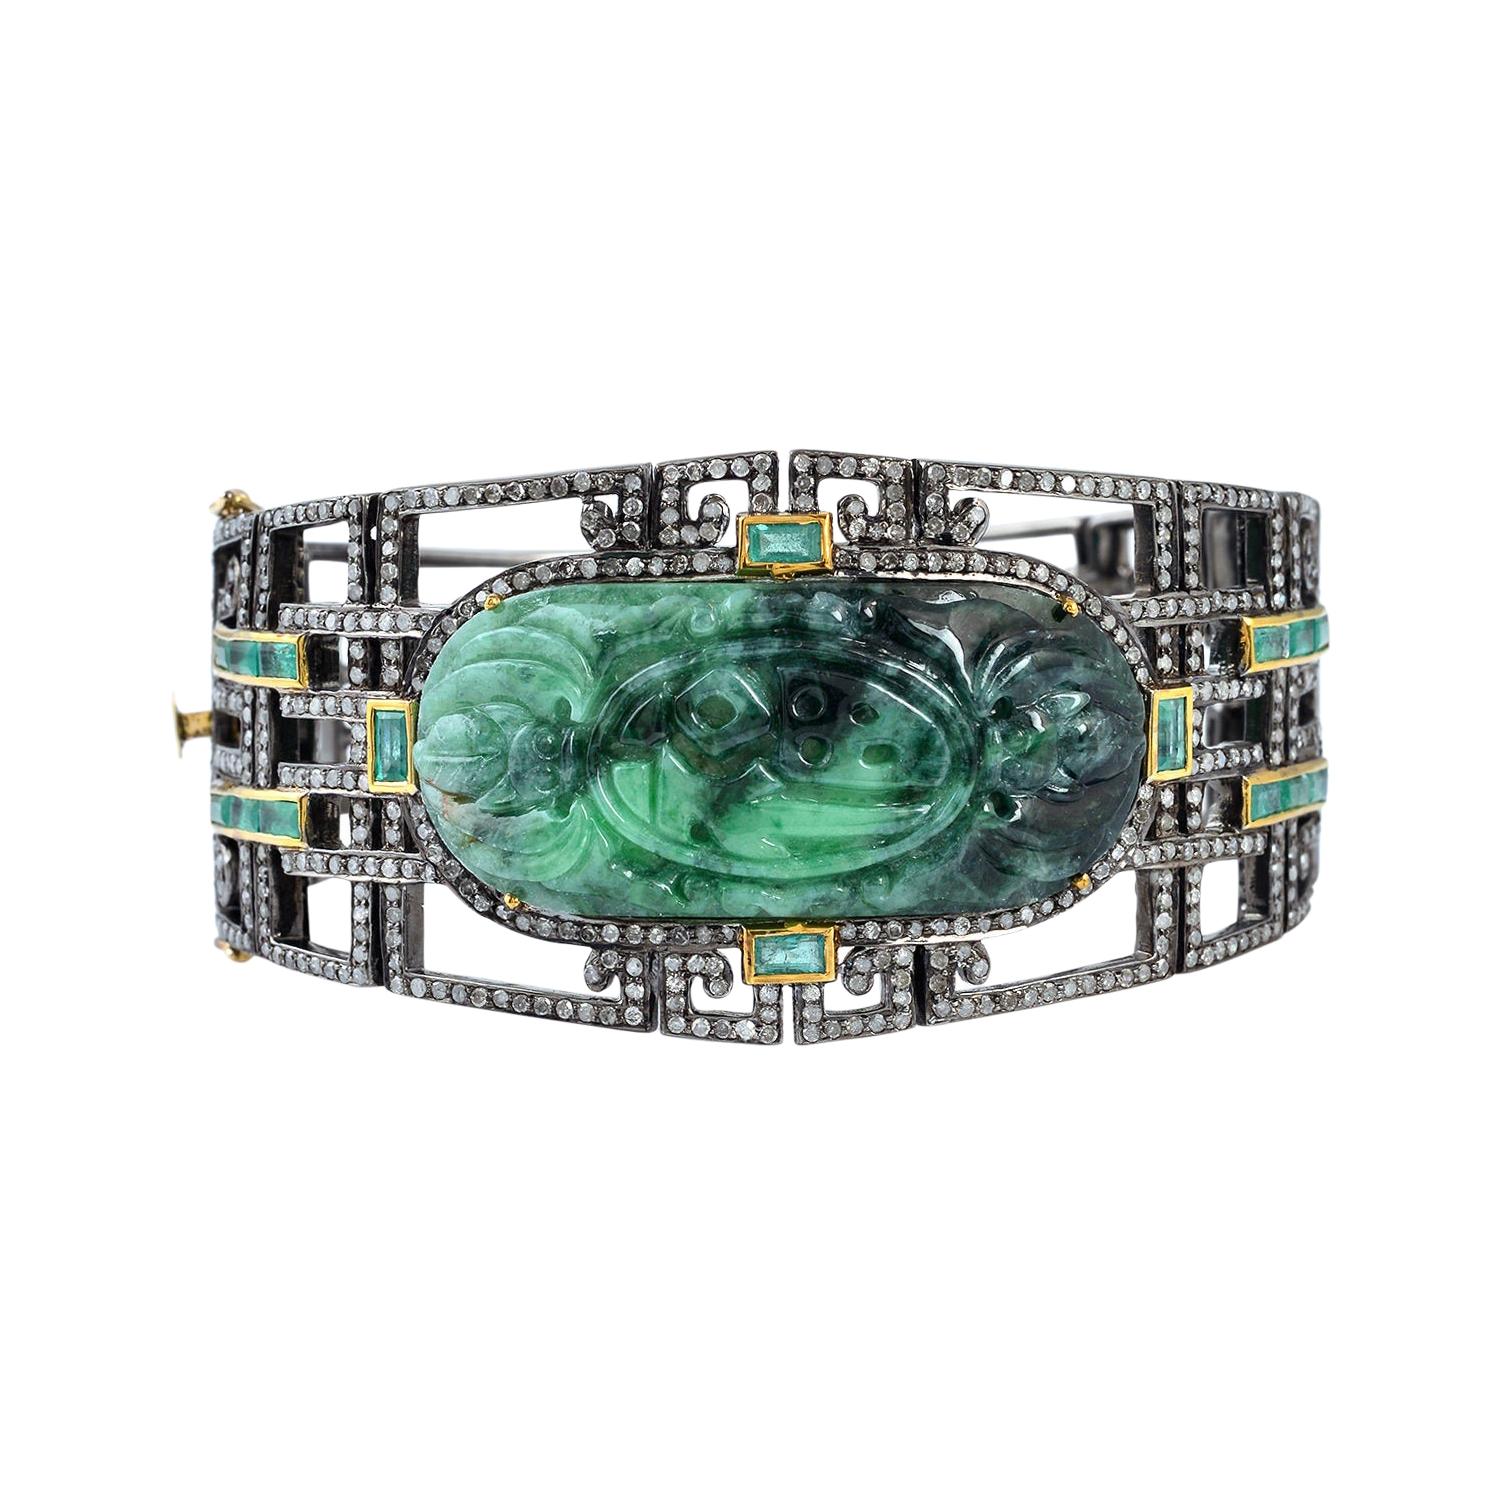 Green Jade Bangle with Diamonds and Emeralds In 18k Gold & Silver